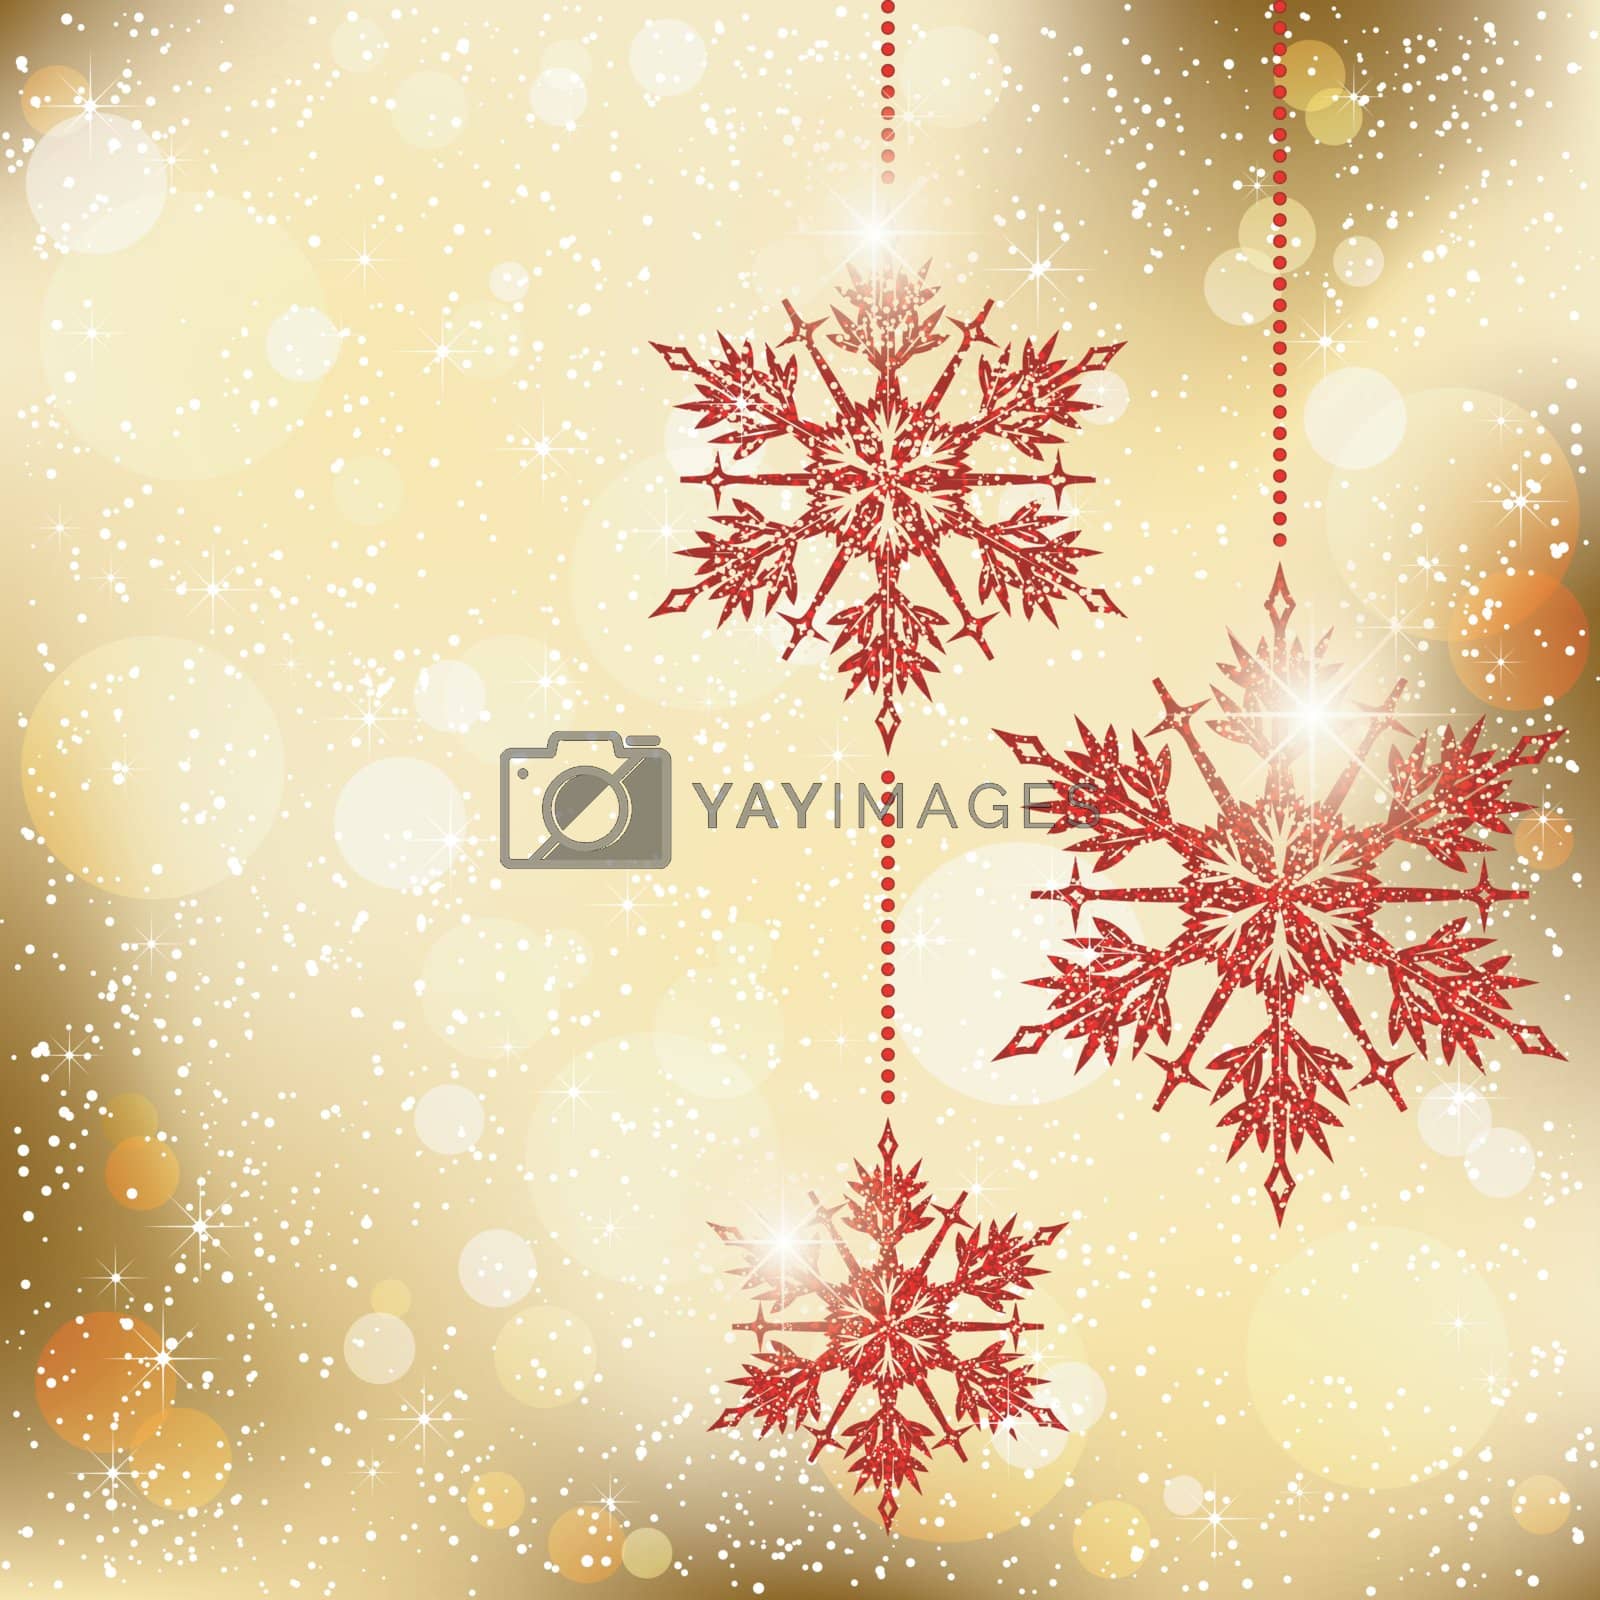 Royalty free image of Sparkling Christmas Snowflakes Background by meikis